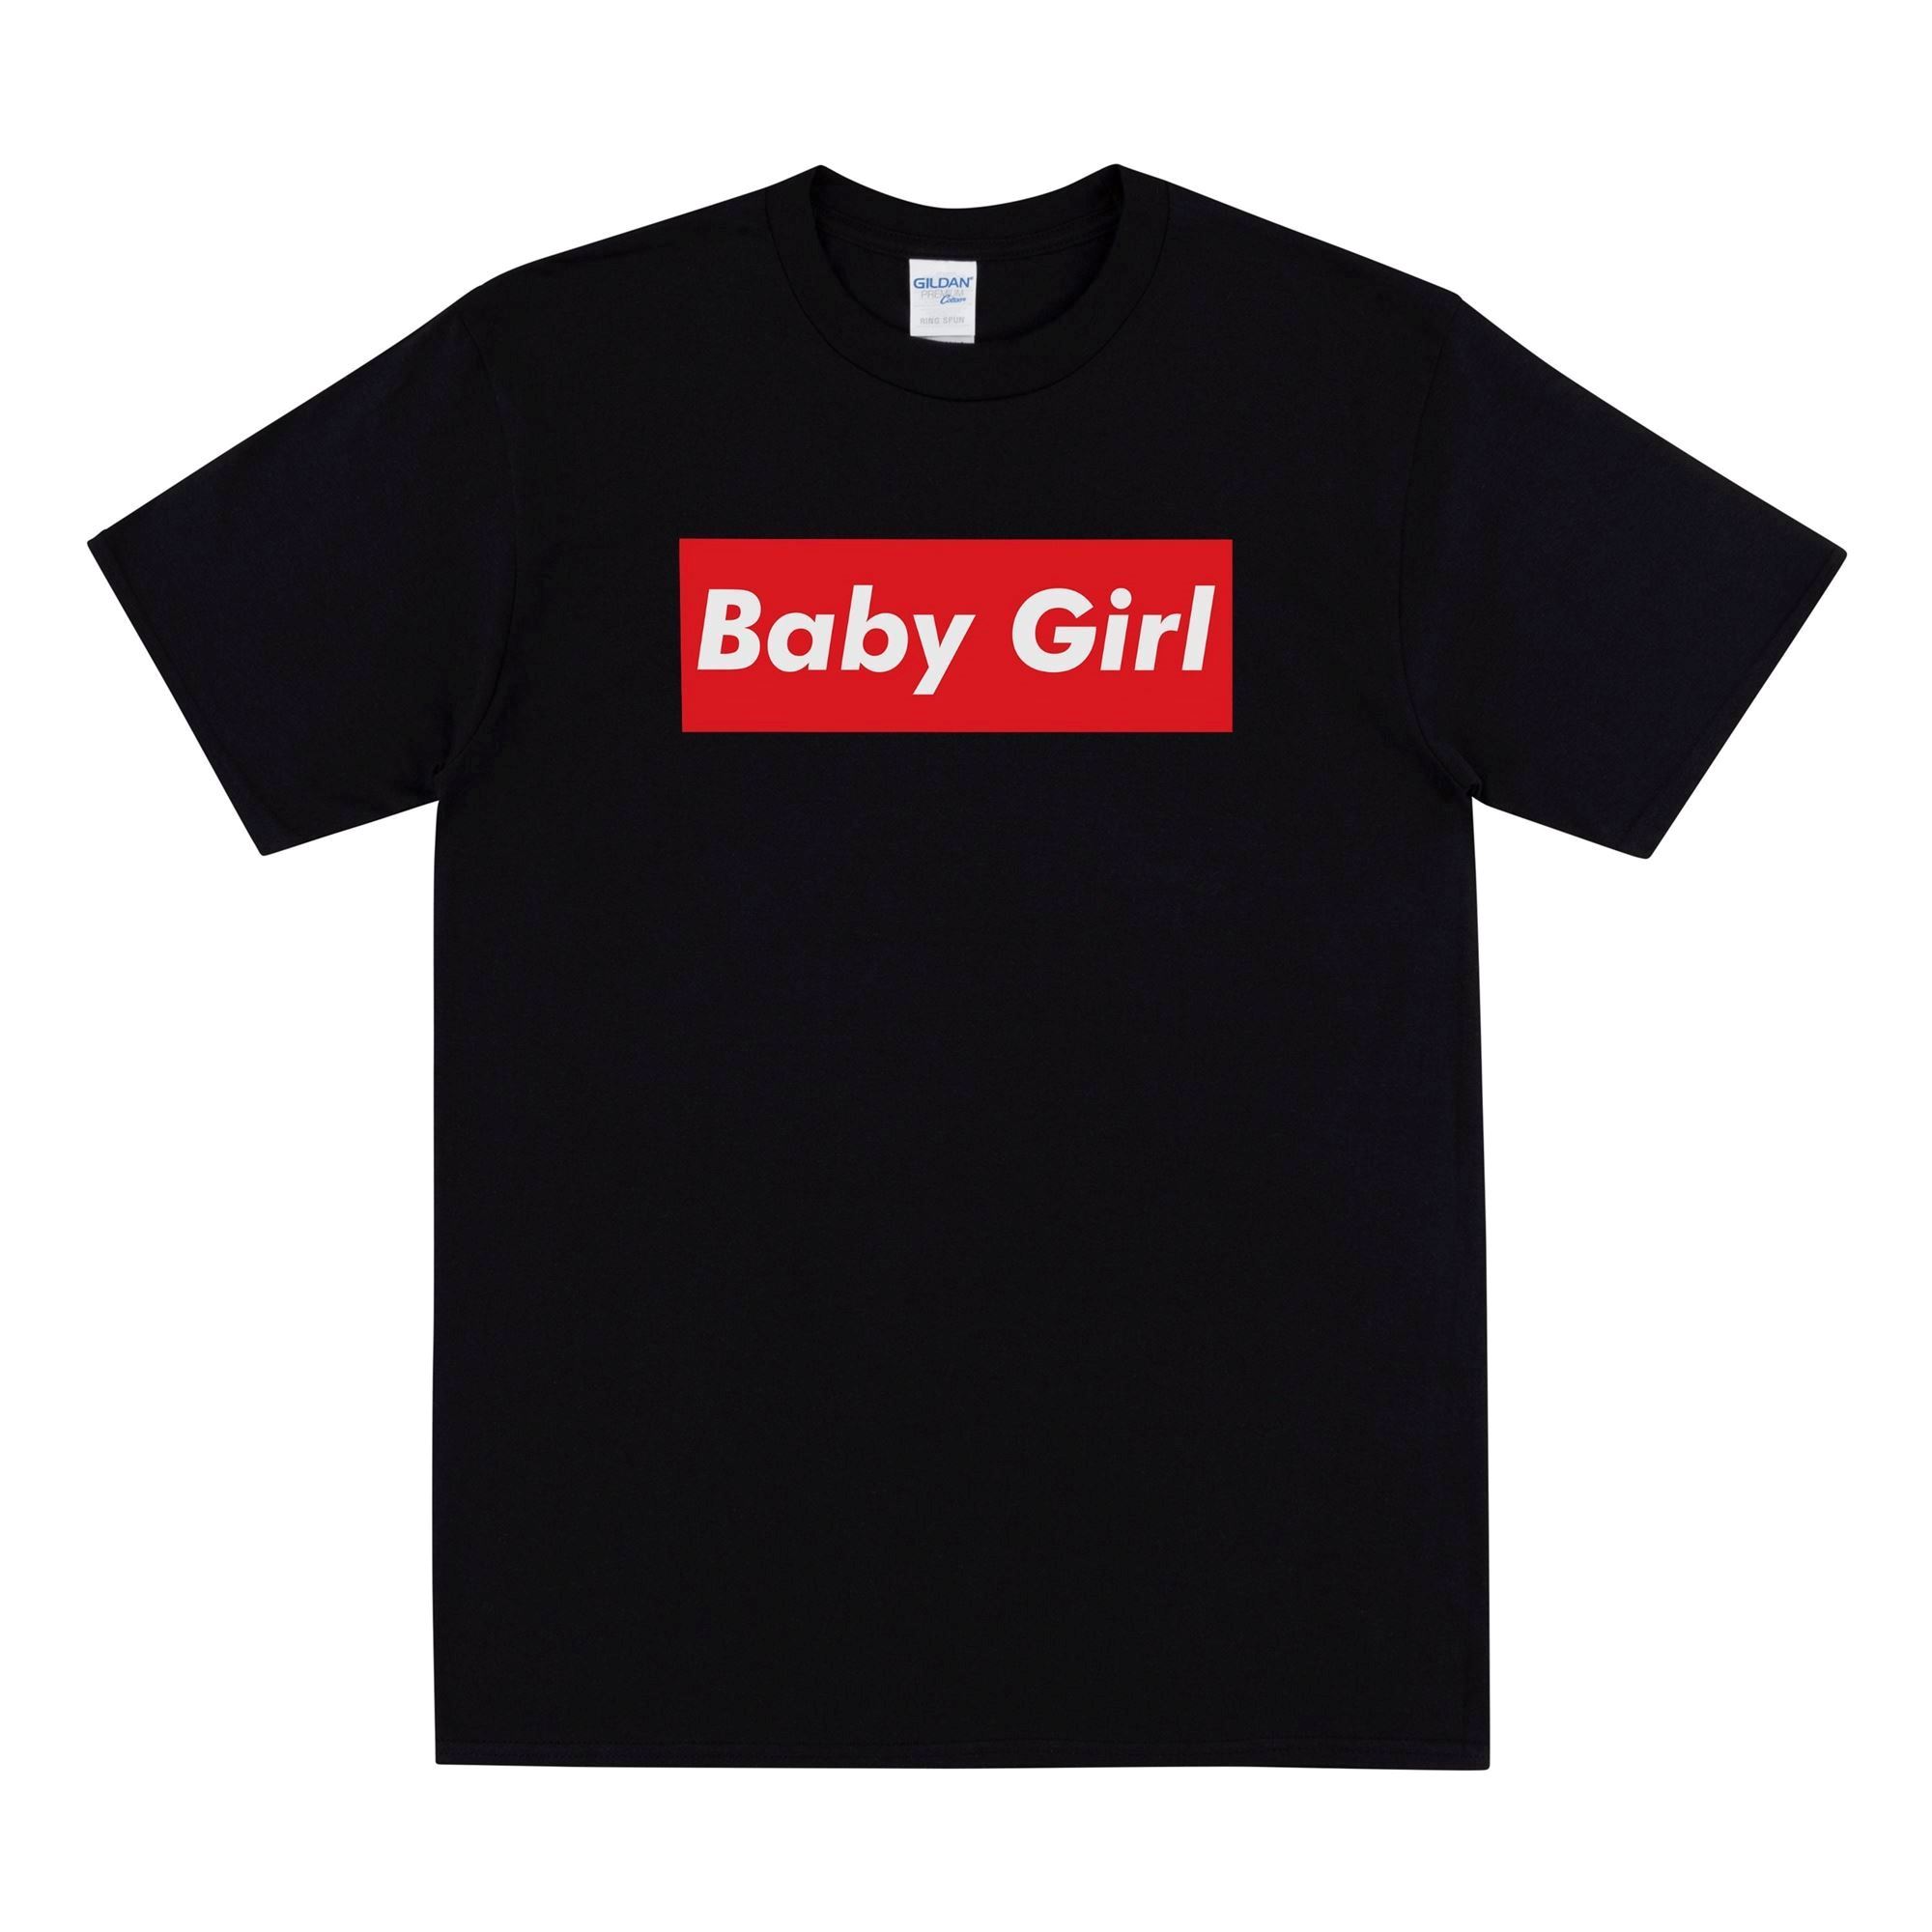 High Quality Baby Girl T-shirt For Women Funny Tee For Her Fashion Brand Logo Parody Inspirational Sayings Best Friend Gift Funny Tshirt For Women 